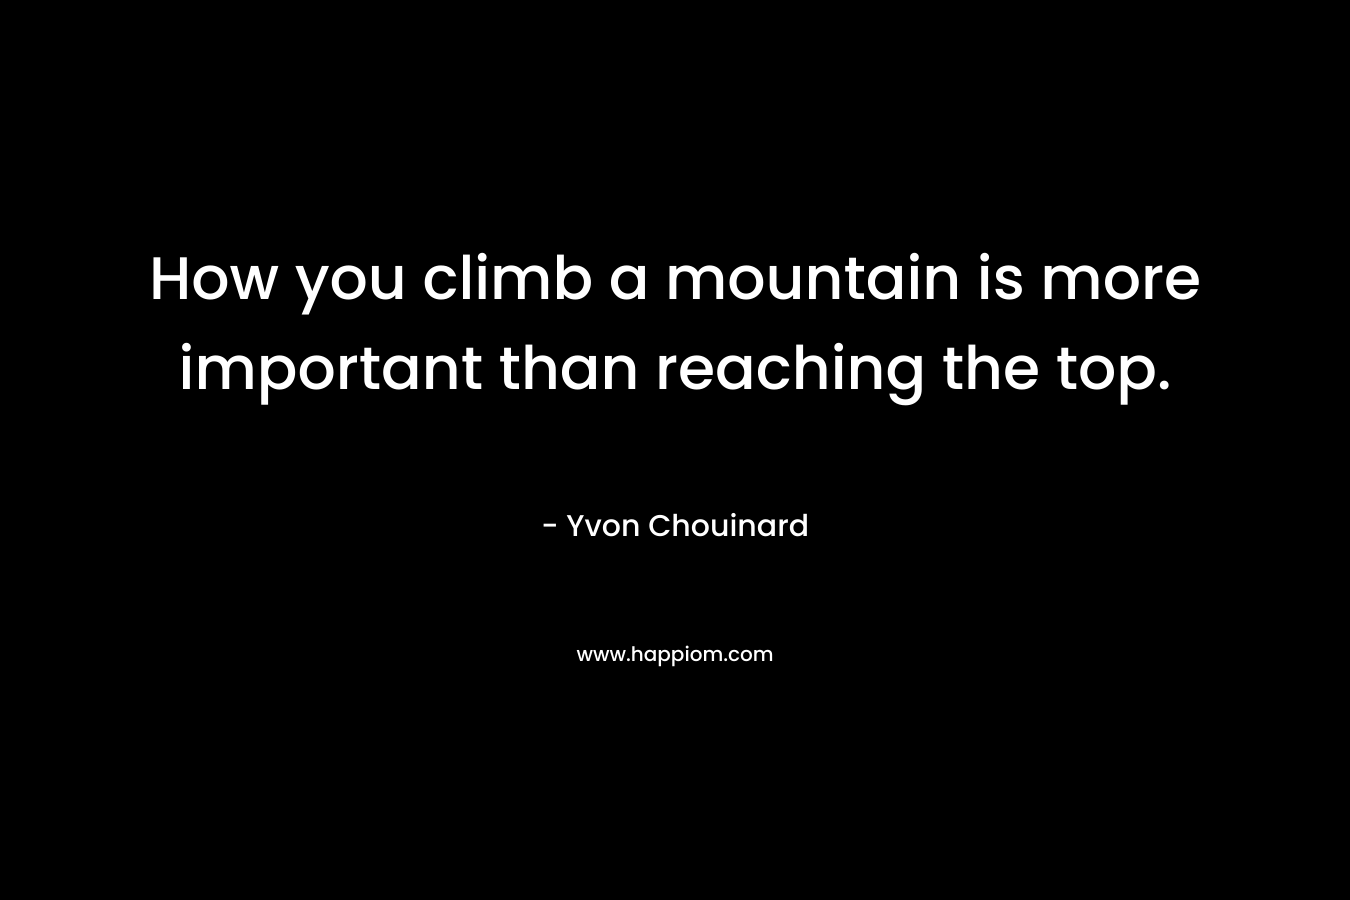 How you climb a mountain is more important than reaching the top.